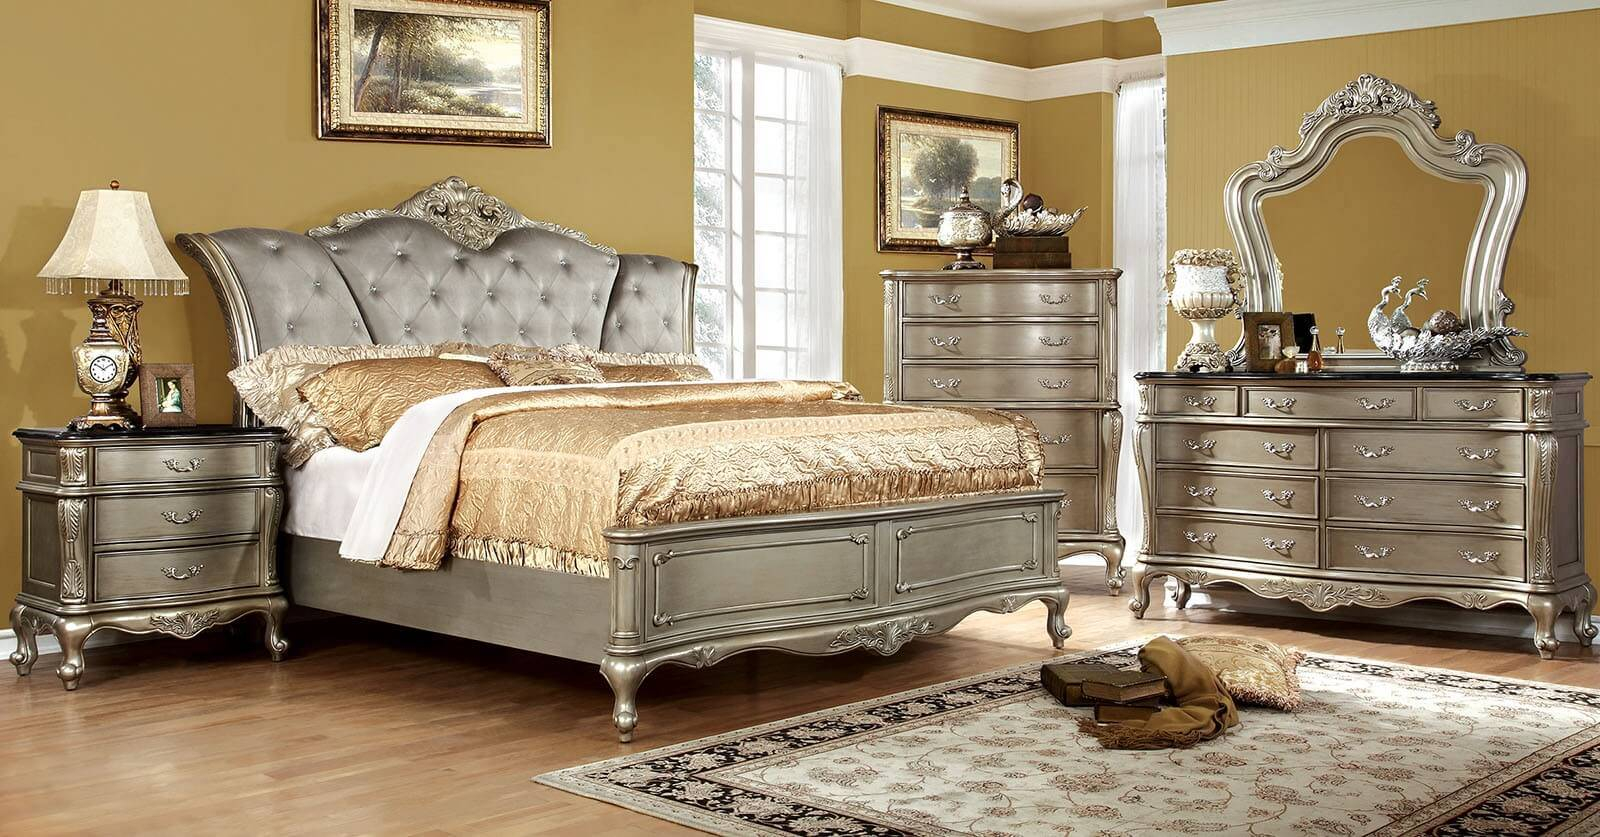 Bedroom Rc Willey Bedroom Sets For Cozy Bed Furniture Ideas with regard to dimensions 1600 X 837